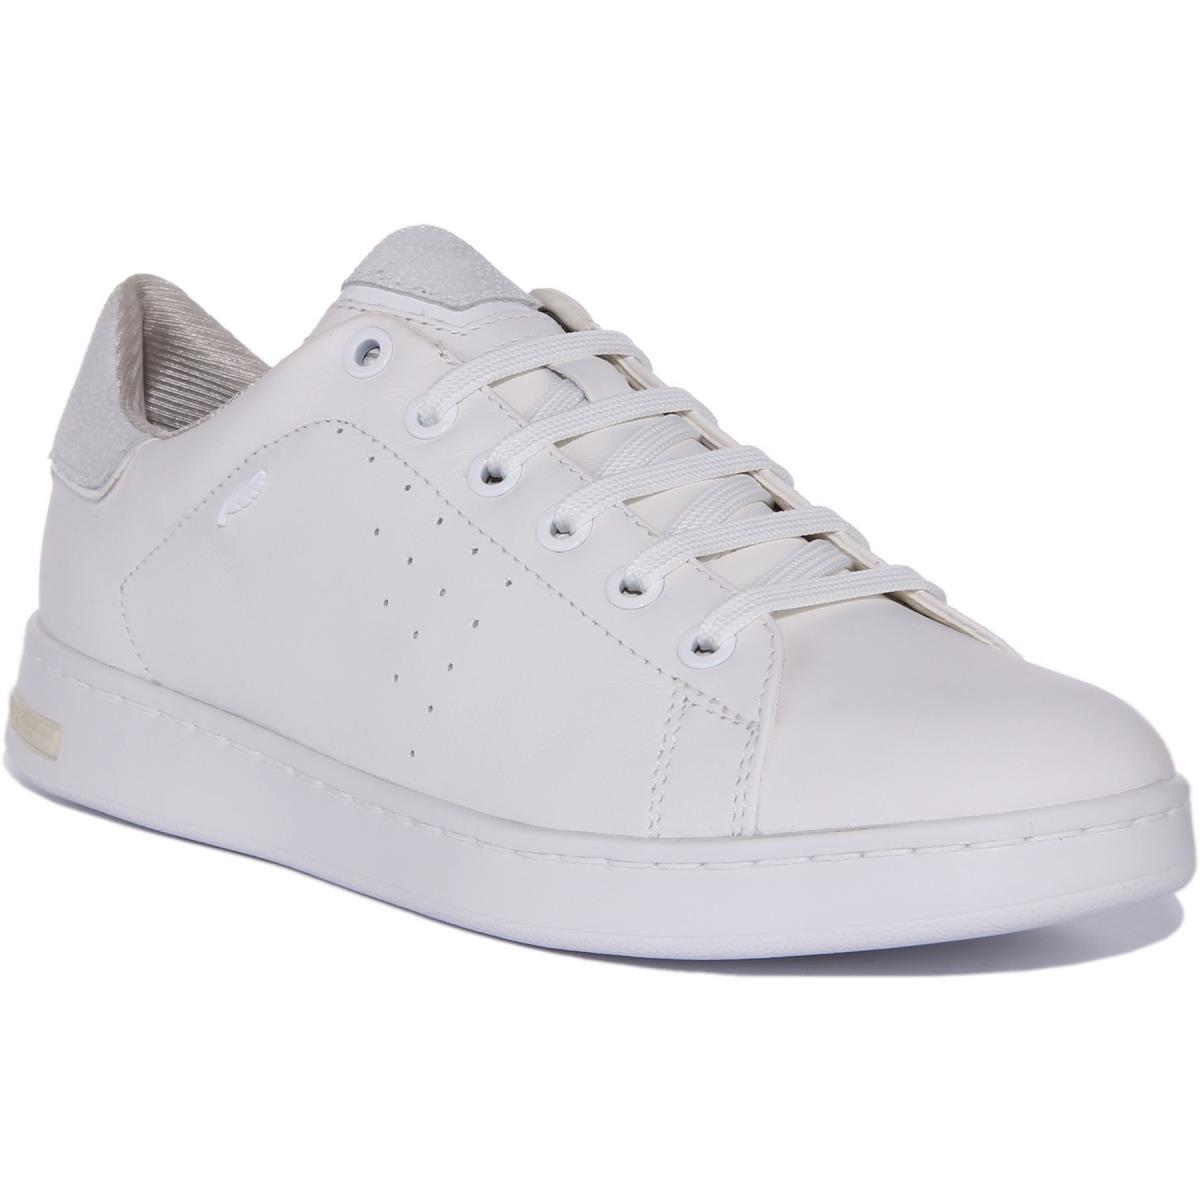 Geox D Jaysen Low Profile Casual Leather Shoes White Womens US 5 - 10 WHITE